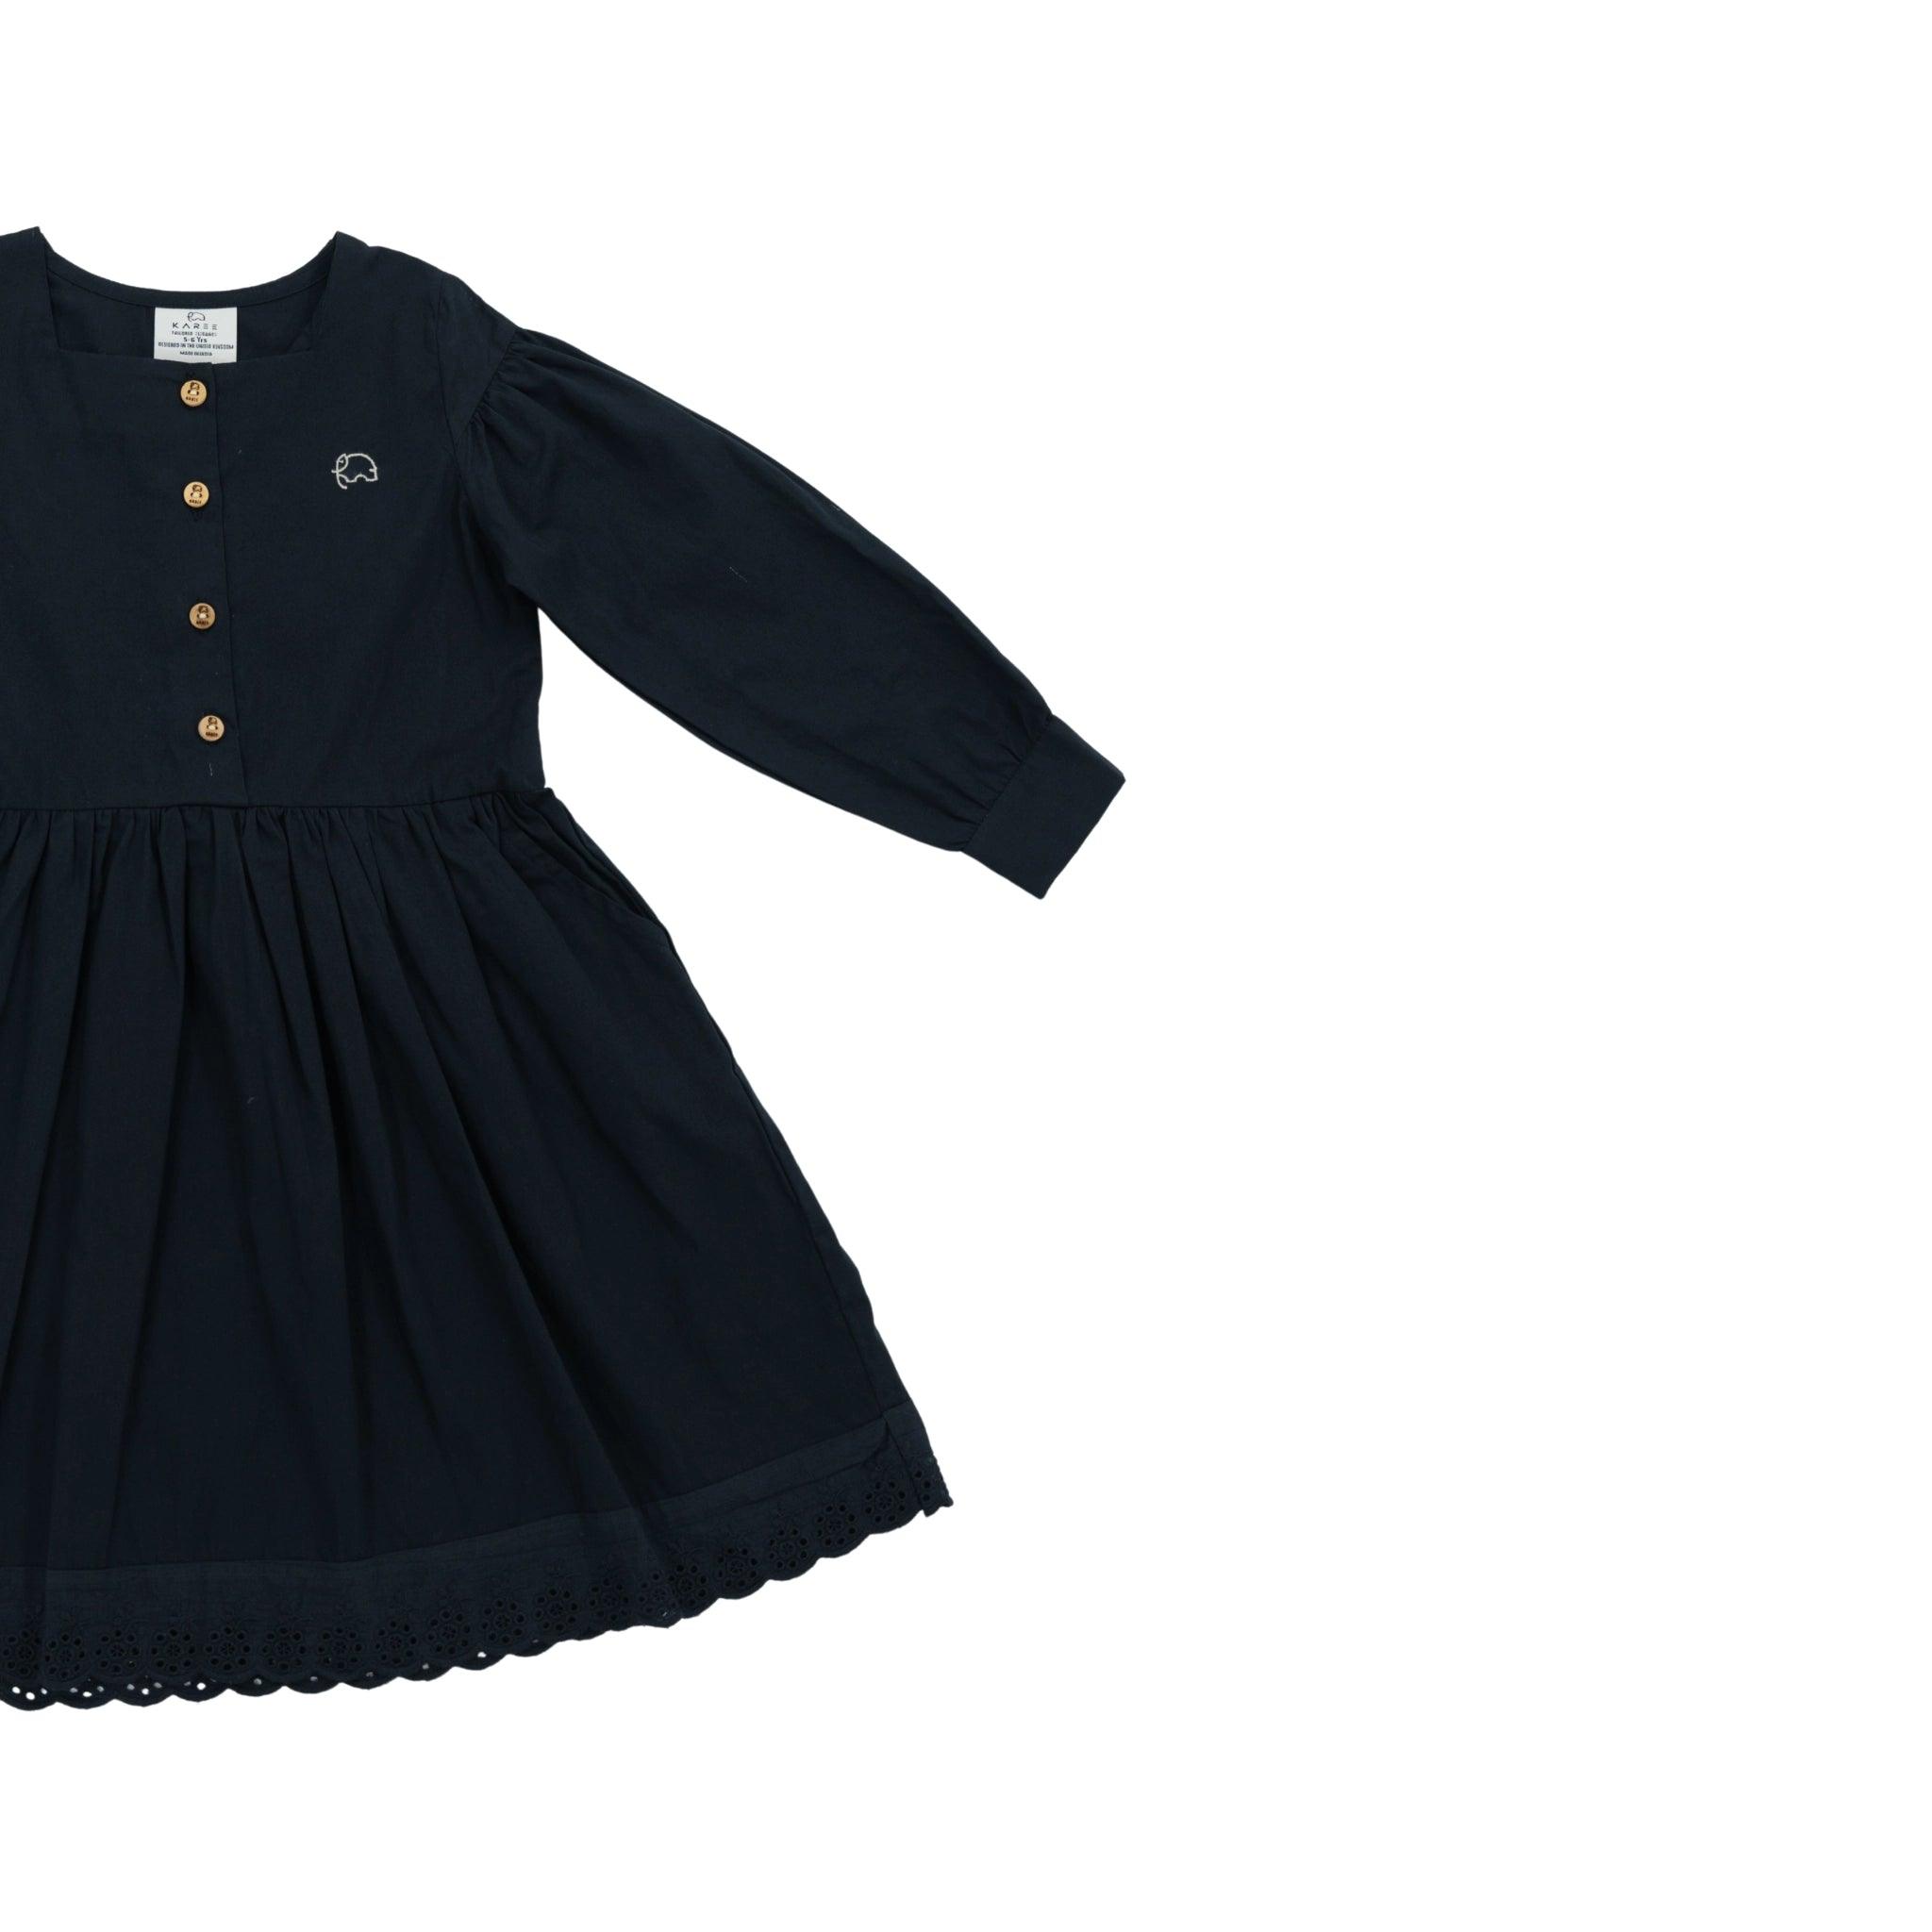 Dark blue toddler dress with long puff sleeves, buttoned front, and lace trim, isolated on a white background. 
Product Name: Black Long Puff Sleeve Cotton Dress 
Brand Name: Karee